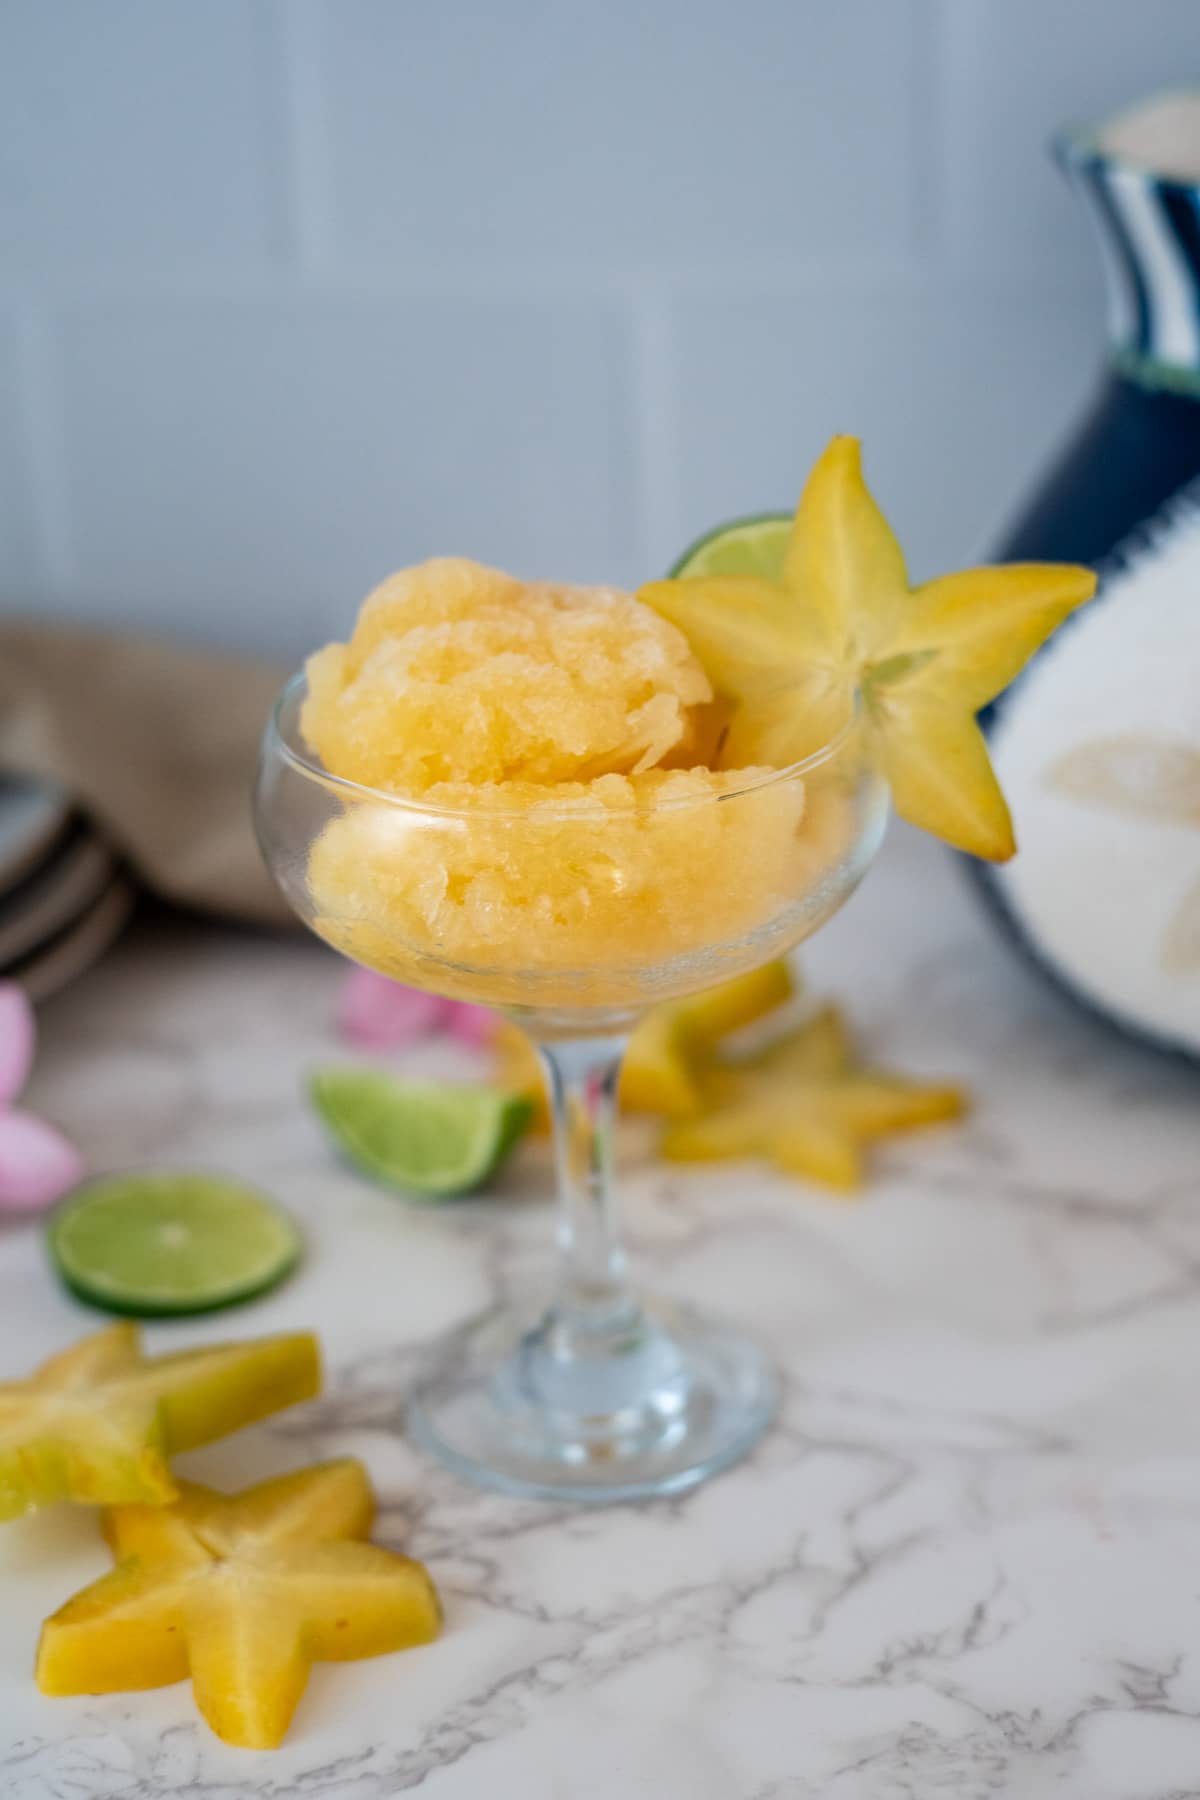 Star fruit sorbet served in a glass with star shaped garnishes.